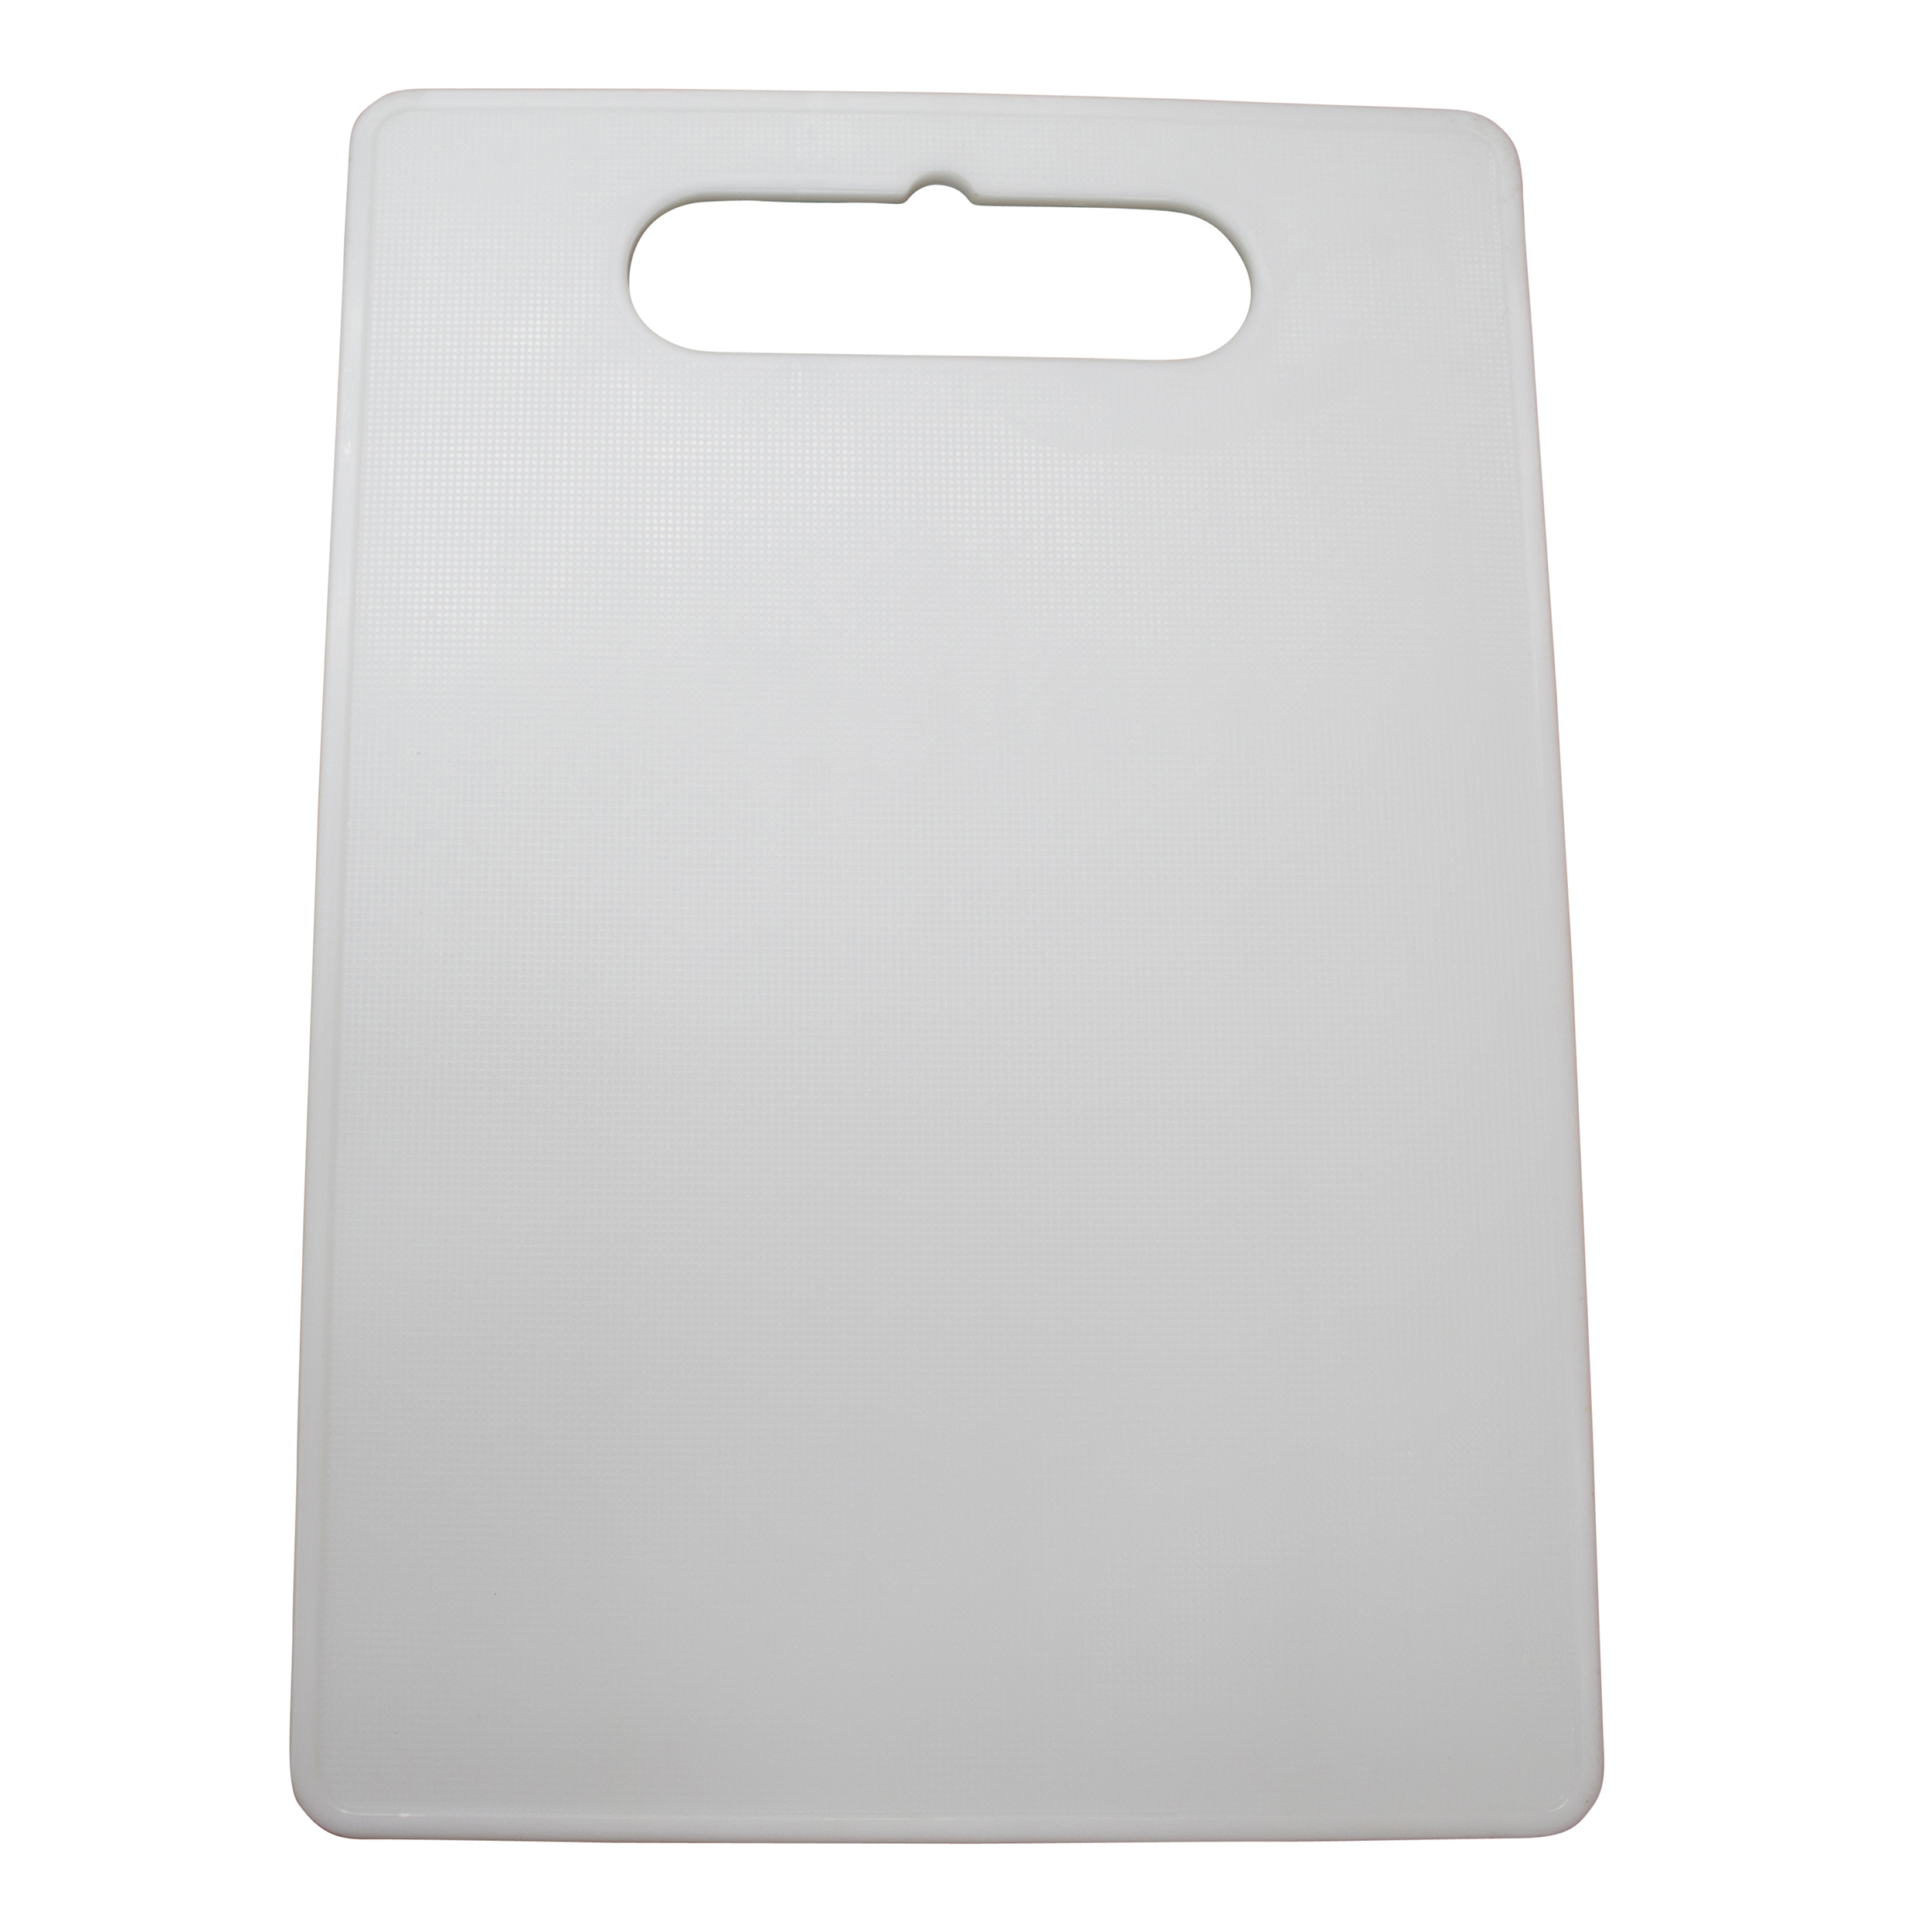 Large Plastic Chopping Board White Thick Double Sided Cutting Board 45x30cm 